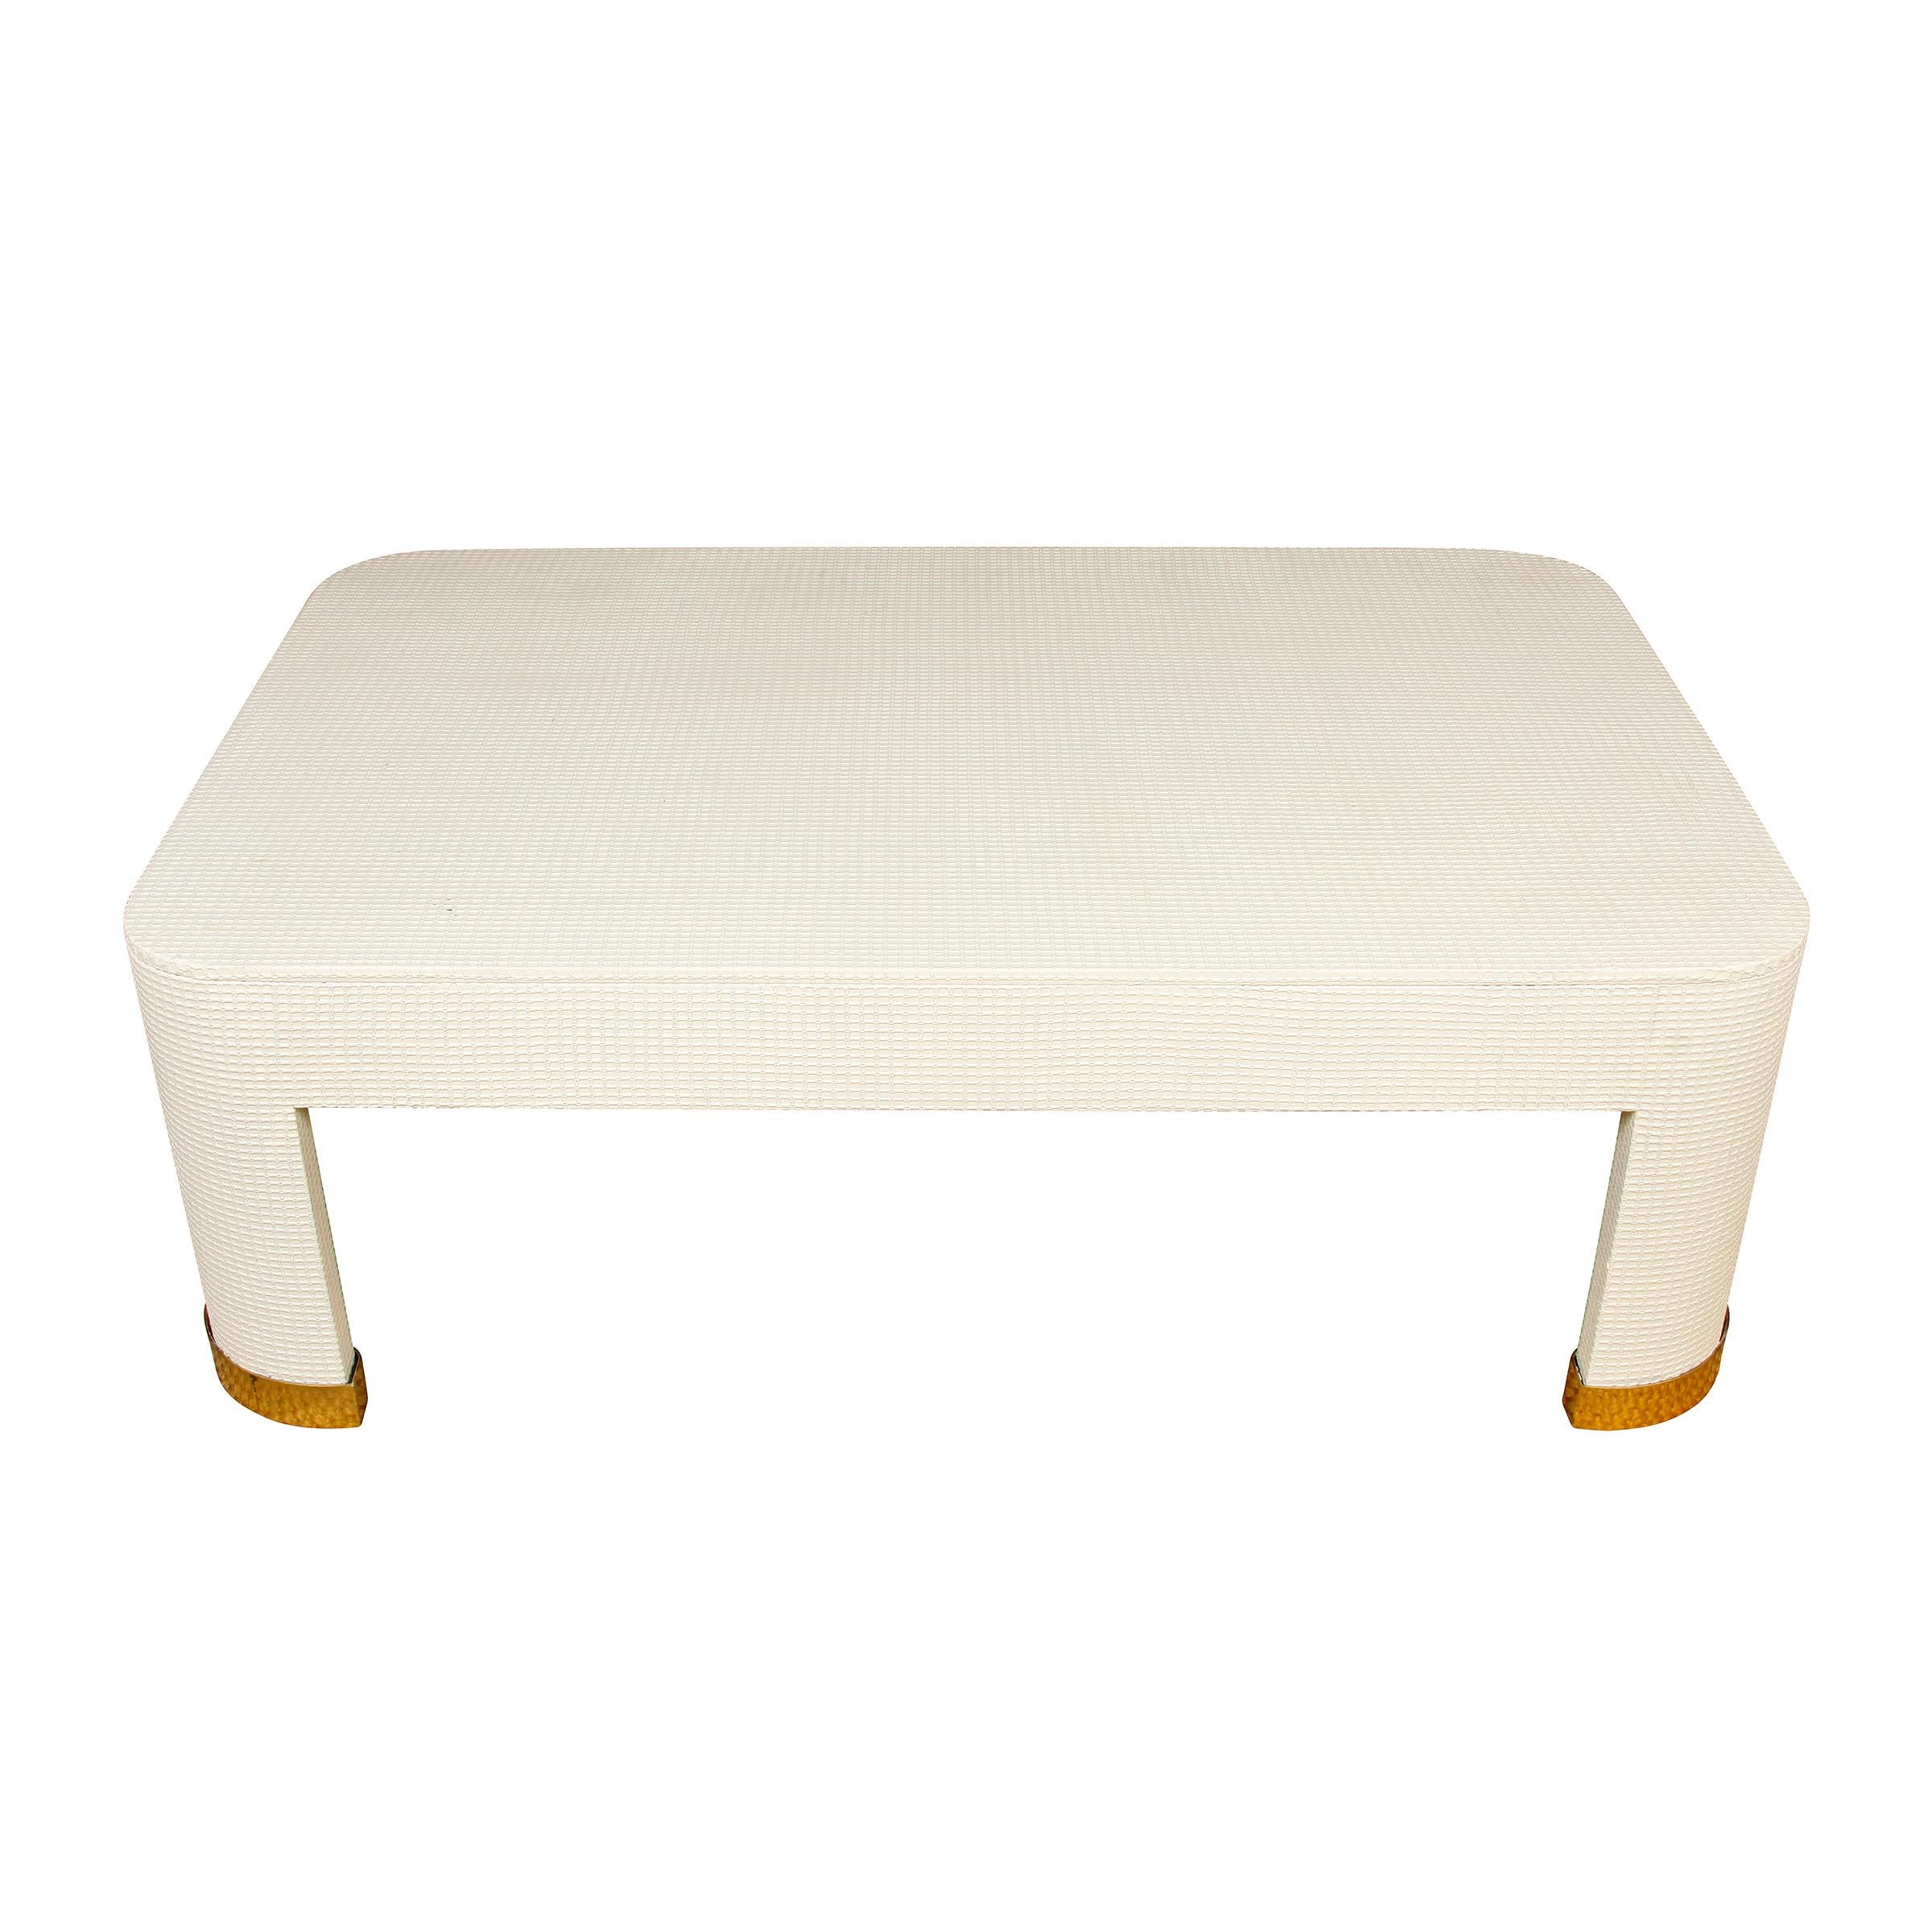 Vintage White Textured Cocktail Table with Brass Feet